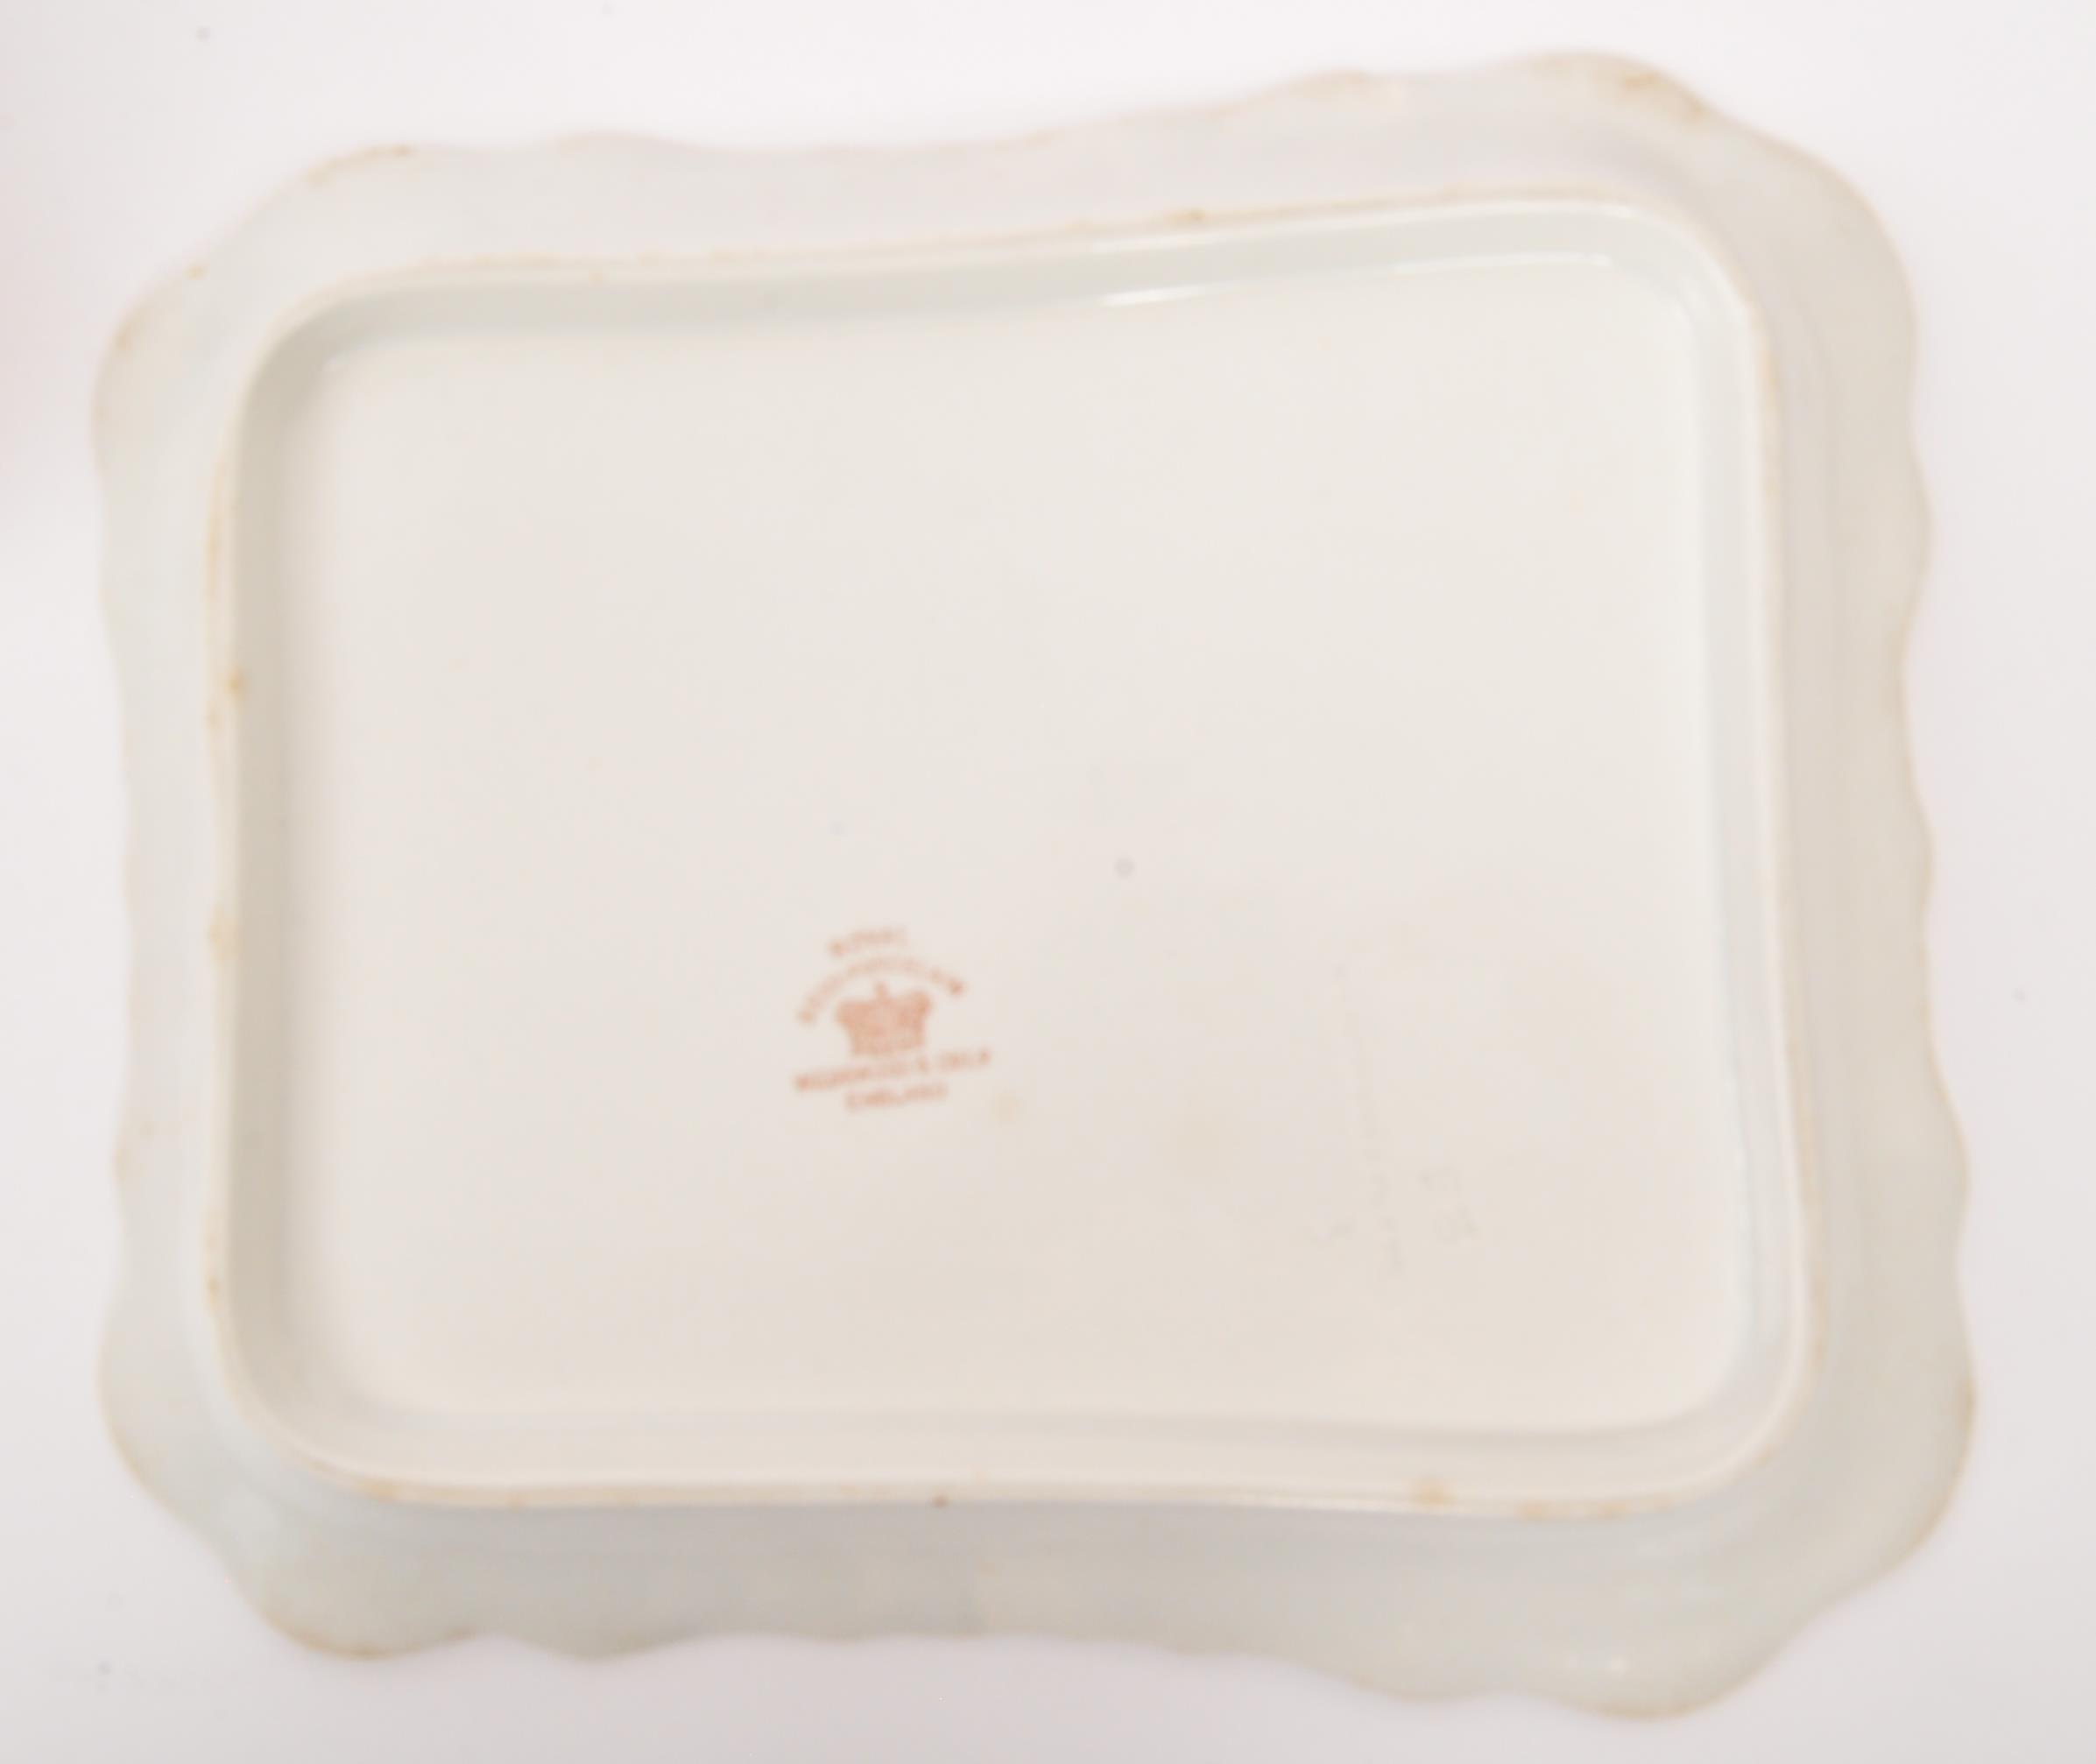 EARLY 20TH CENTURY WEDGWOOD CHEESE DISH - Image 5 of 6